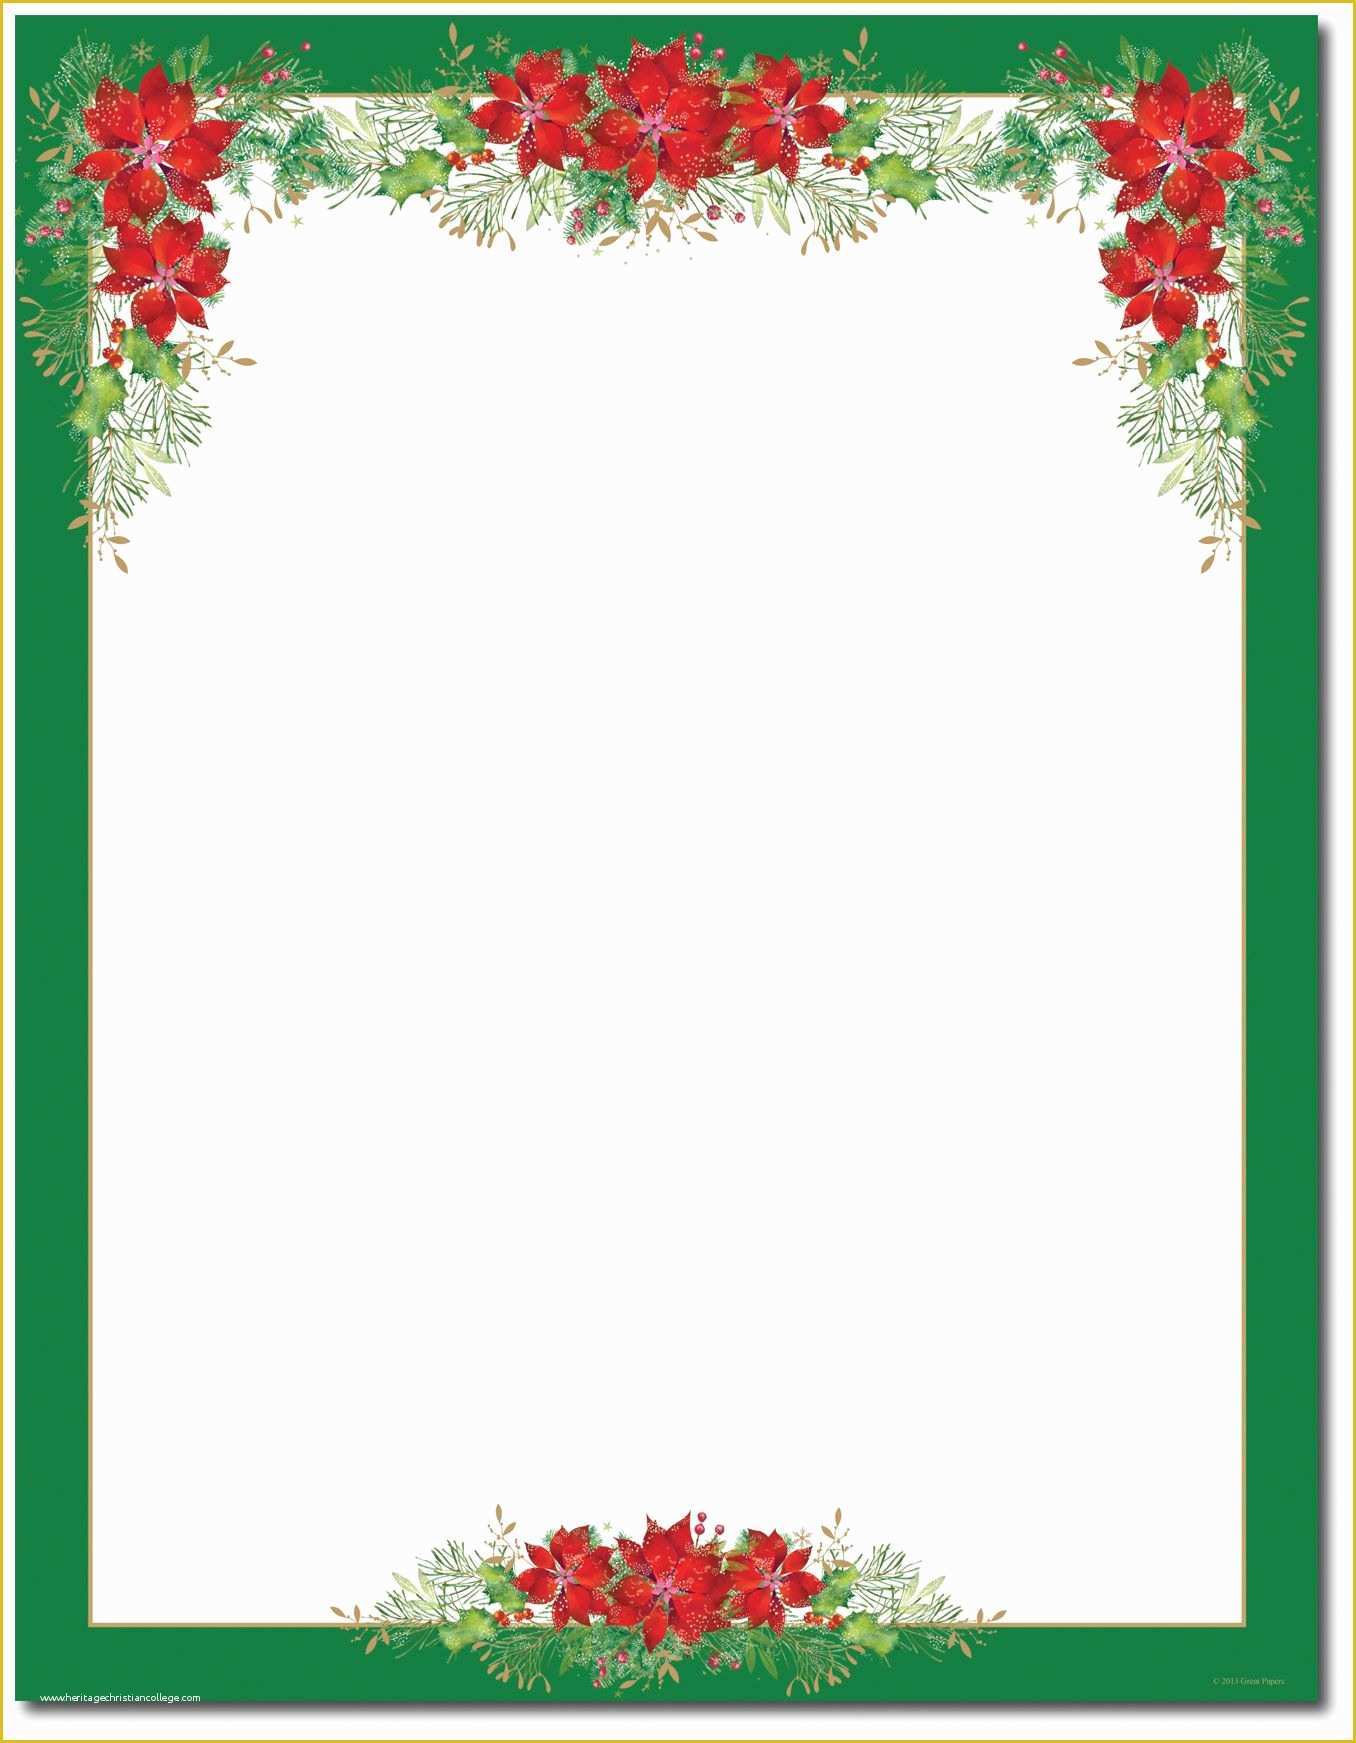 Christmas Border Templates Free Download Of Poinsettia Valance Letterhead Holiday Papers